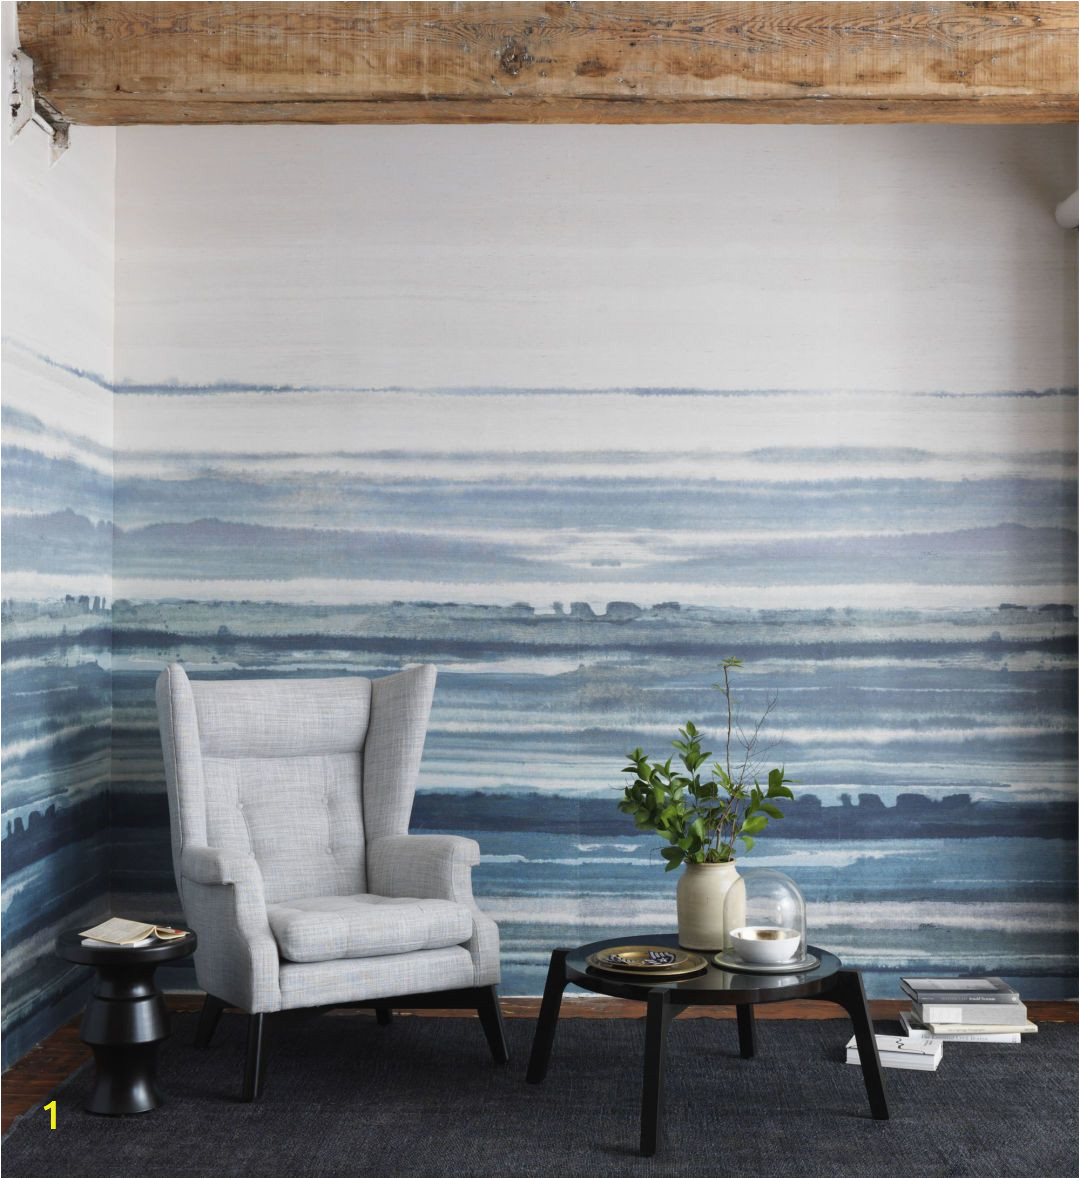 Exterior Wall Mural Designs Garage Makeover Diy Mural with Coastal Vibes